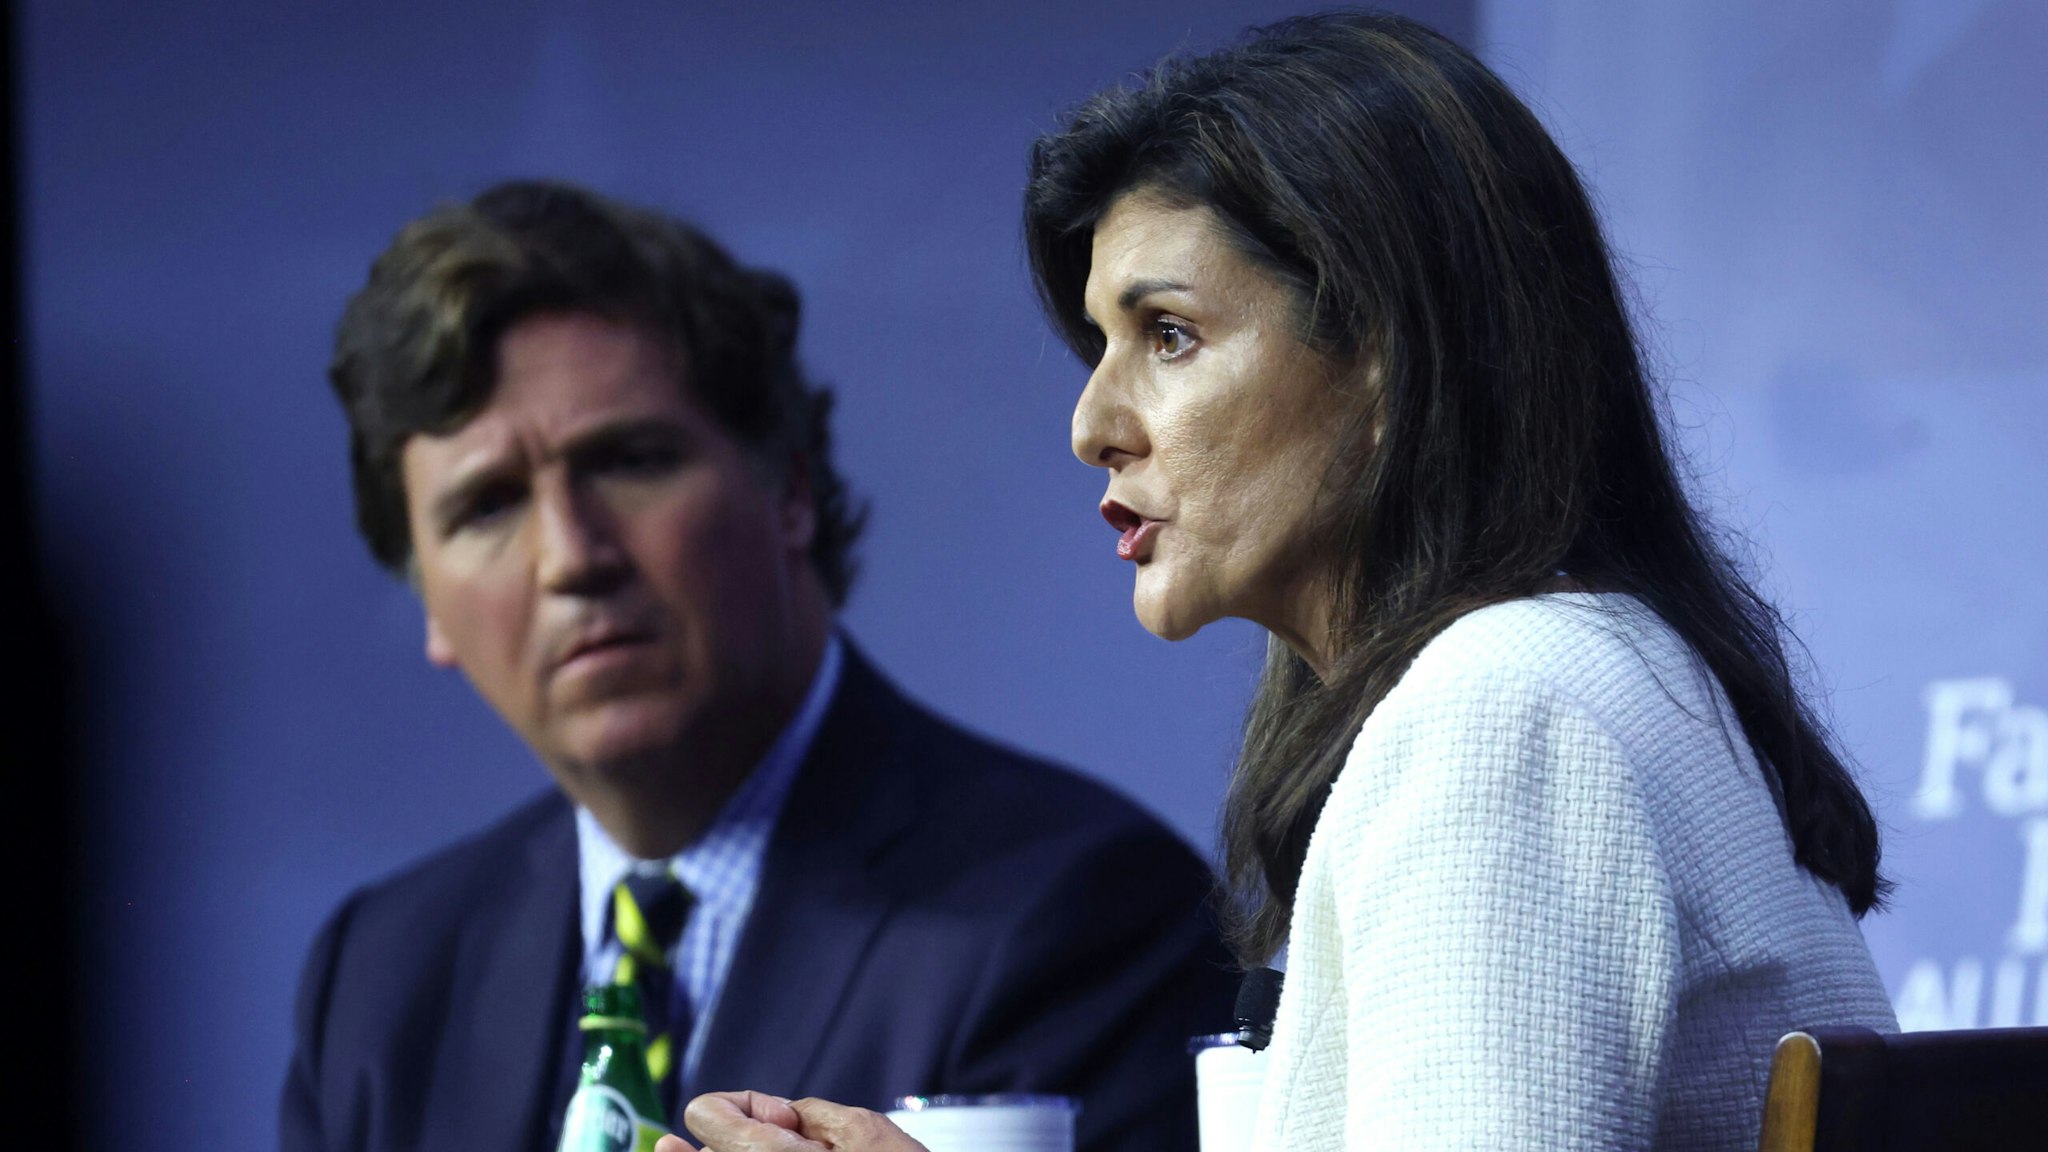 DES MOINES, IOWA - JULY 14: Republican presidential candidate, former U.N. Ambassador Nikki Haley fields questions from former Fox News Television personality Tucker Carlson at the Family Leadership Summit on July 14, 2023 in Des Moines, Iowa. Several Republican presidential candidates were scheduled to speak at the event, billed as “The Midwest’s largest gathering of Christians seeking cultural transformation in the family, Church, government, and more.”